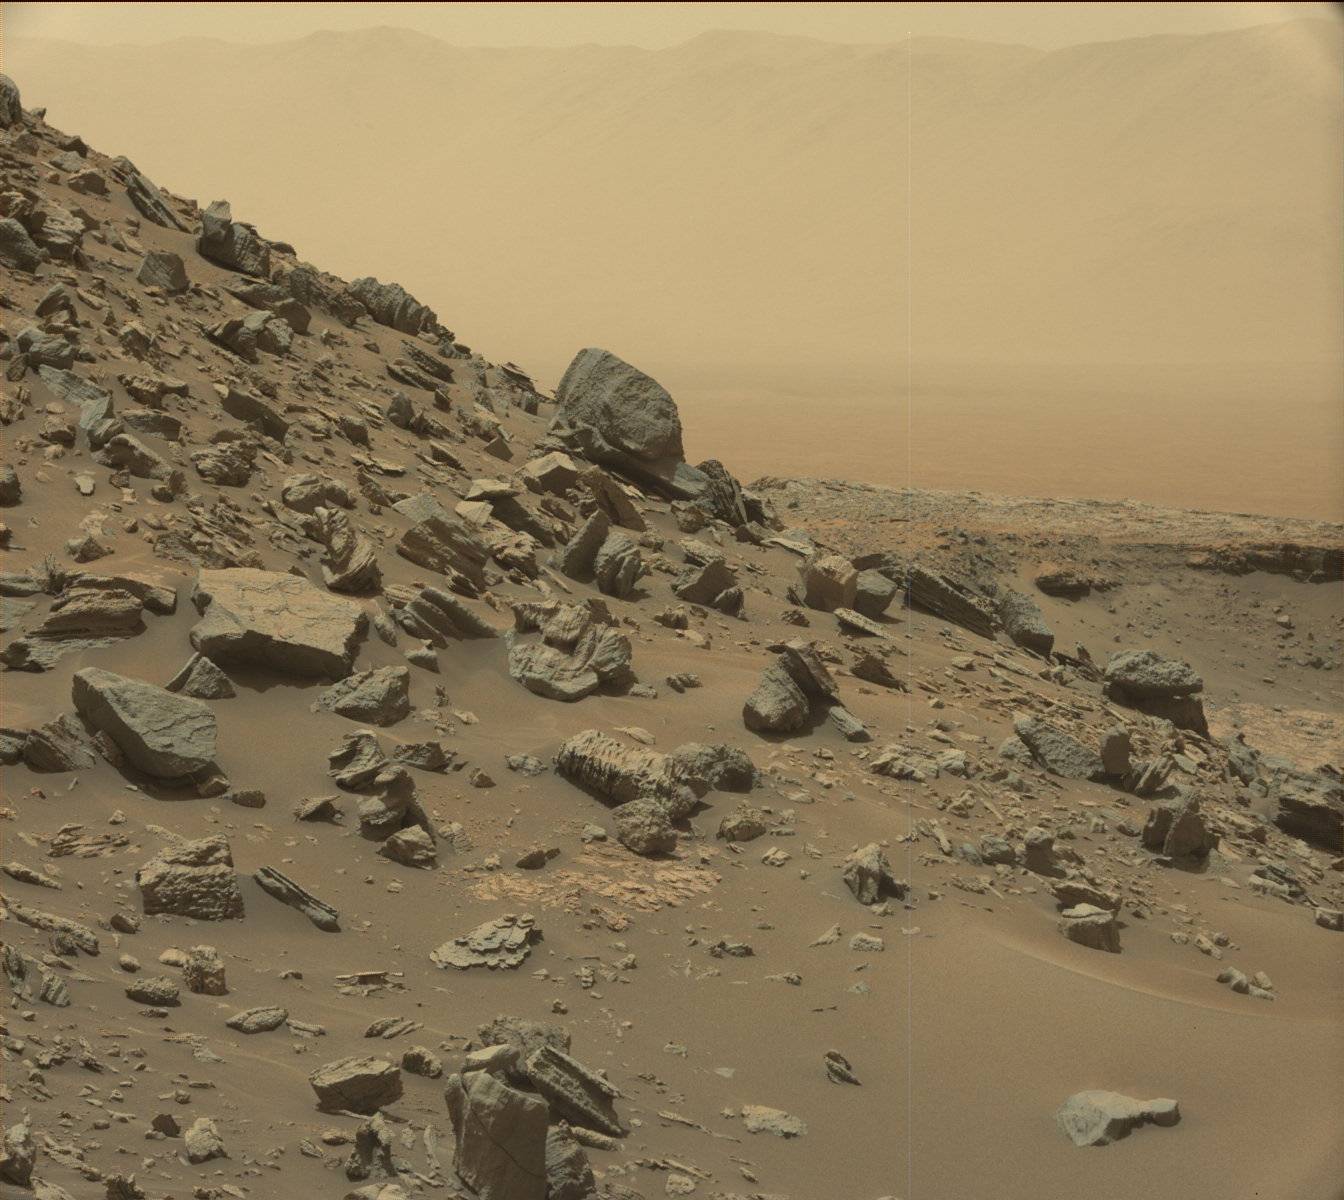 The rim of Gale Crater is visible in the distance, through the dusty haze, in this Curiosity view of a sloping hillside on Mount Sharp